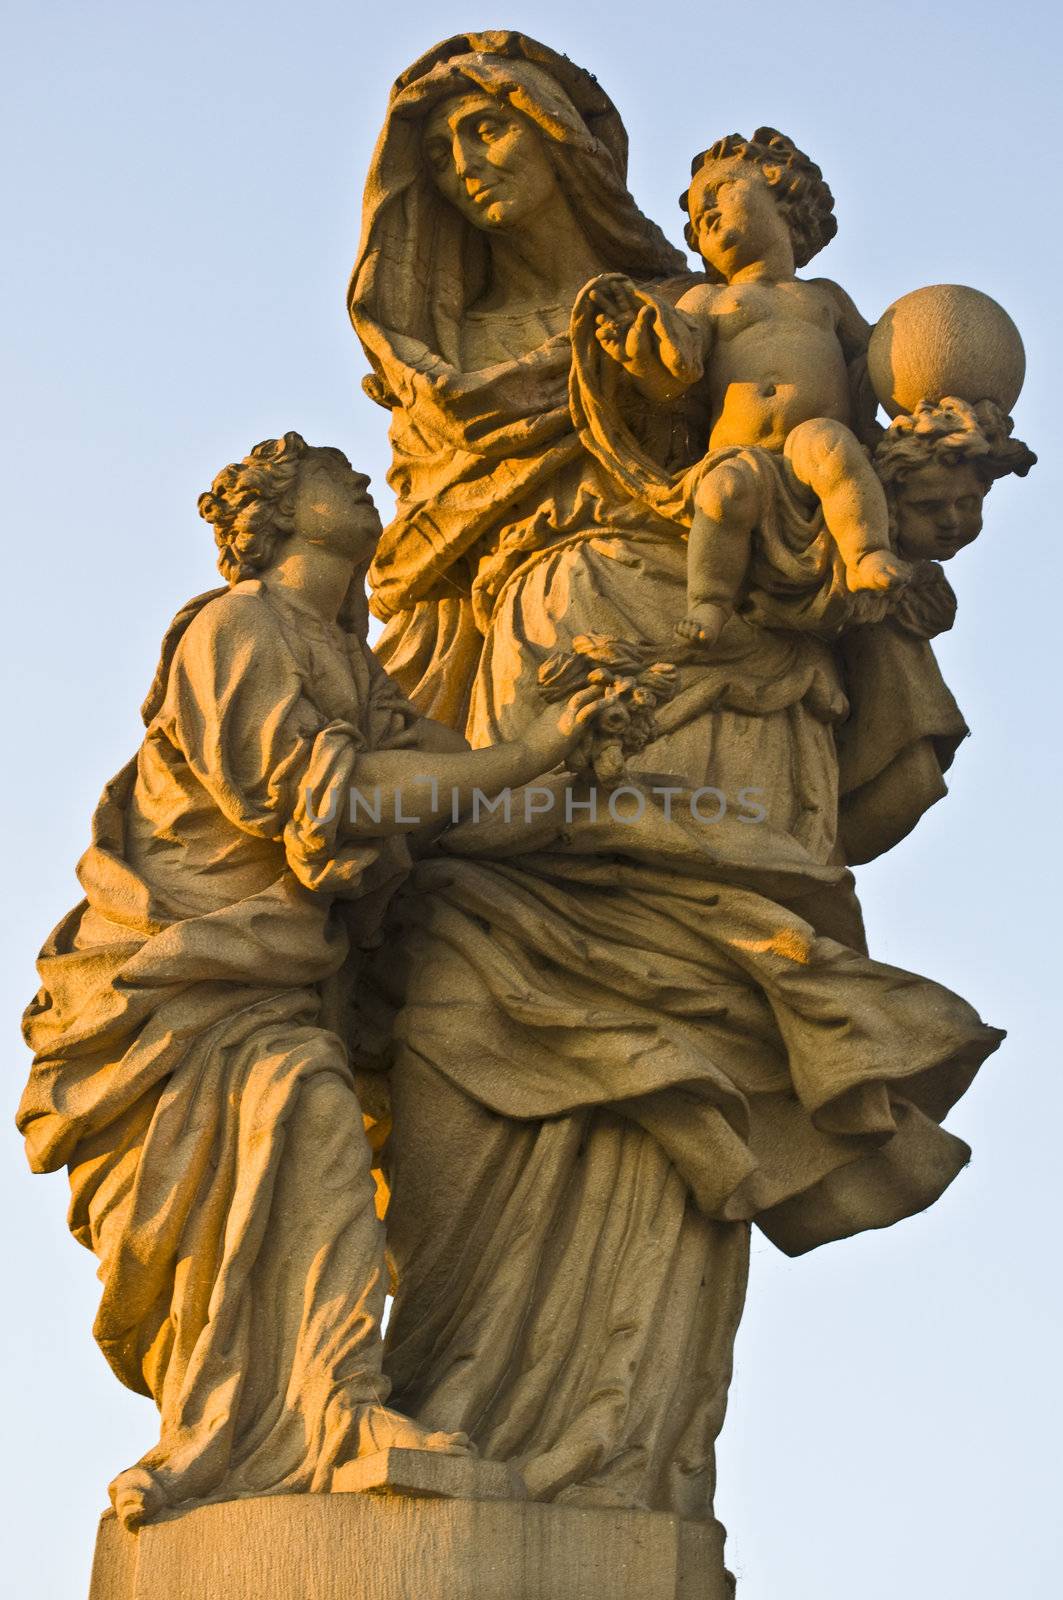 detail of a statue on the Charles bridge in Prague